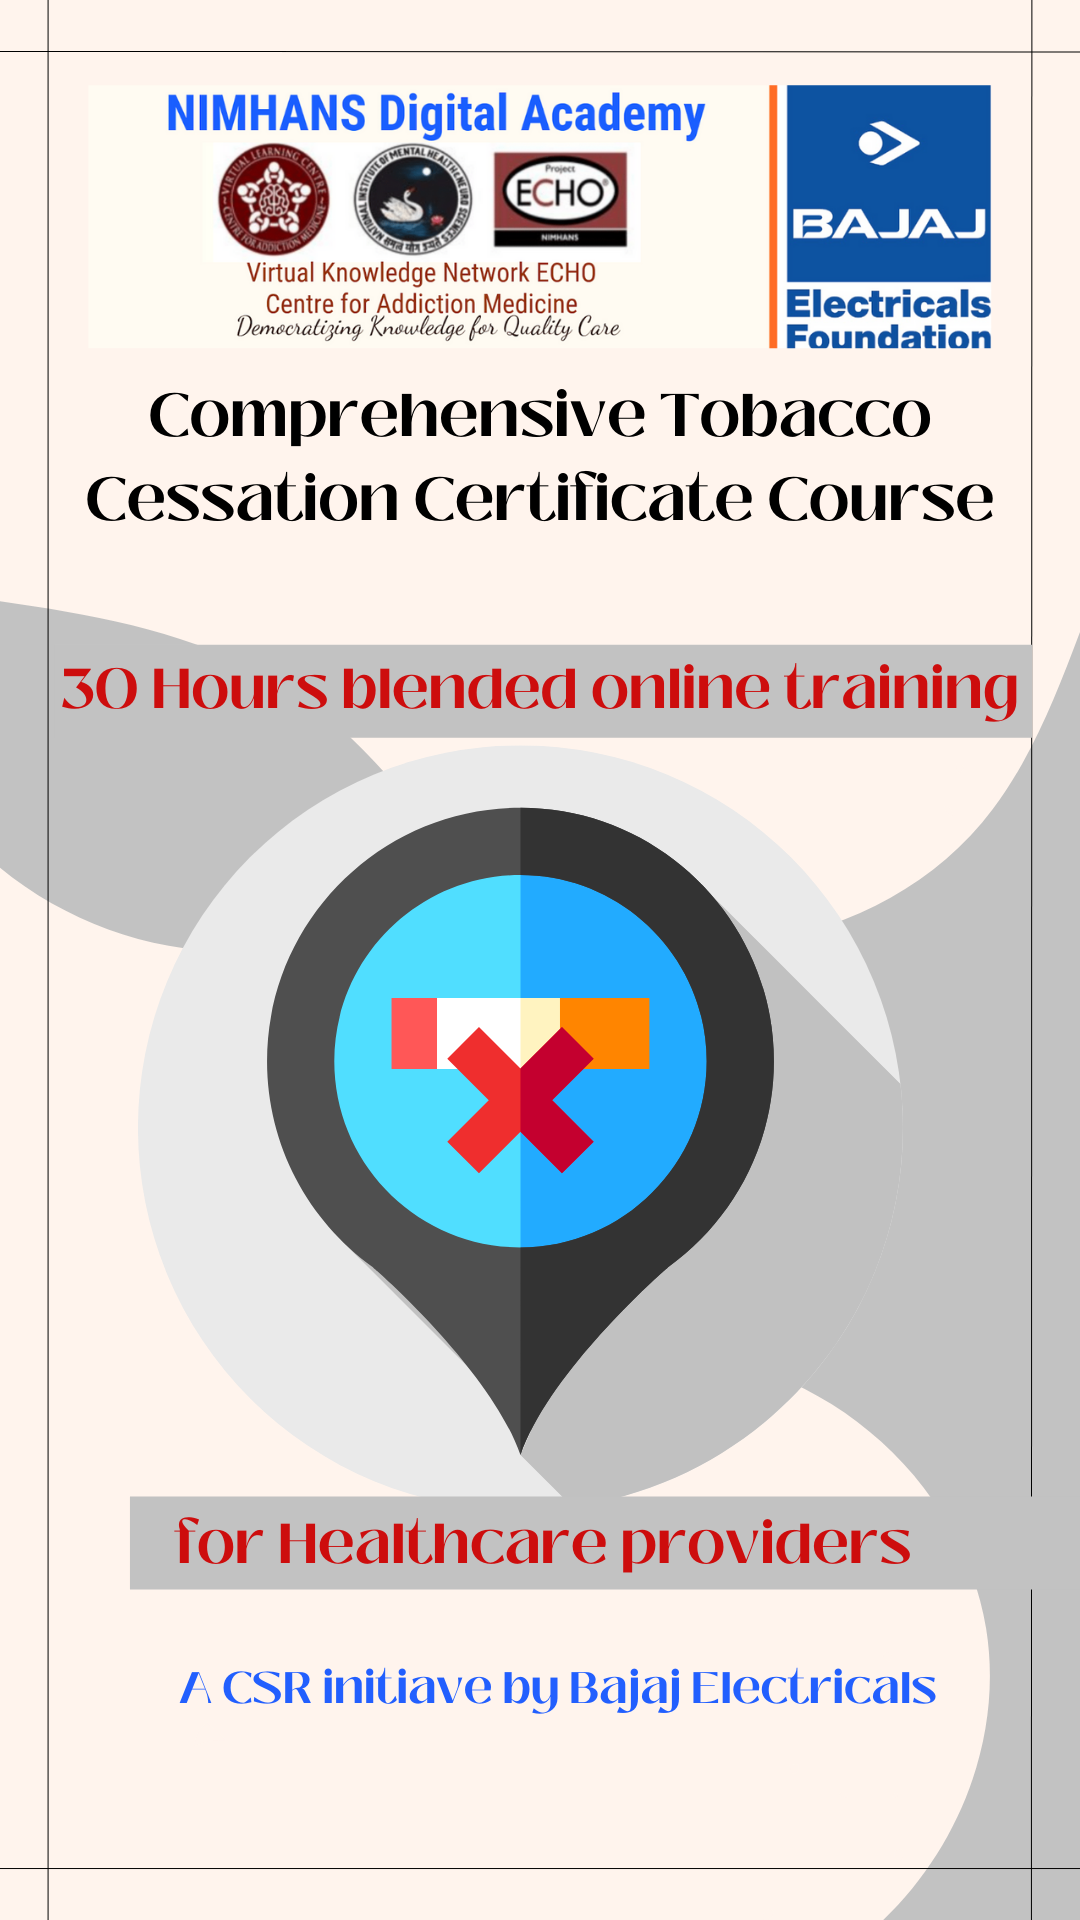 Completed: Comprehensive Tobacco Cessation Certificate Course 5.0